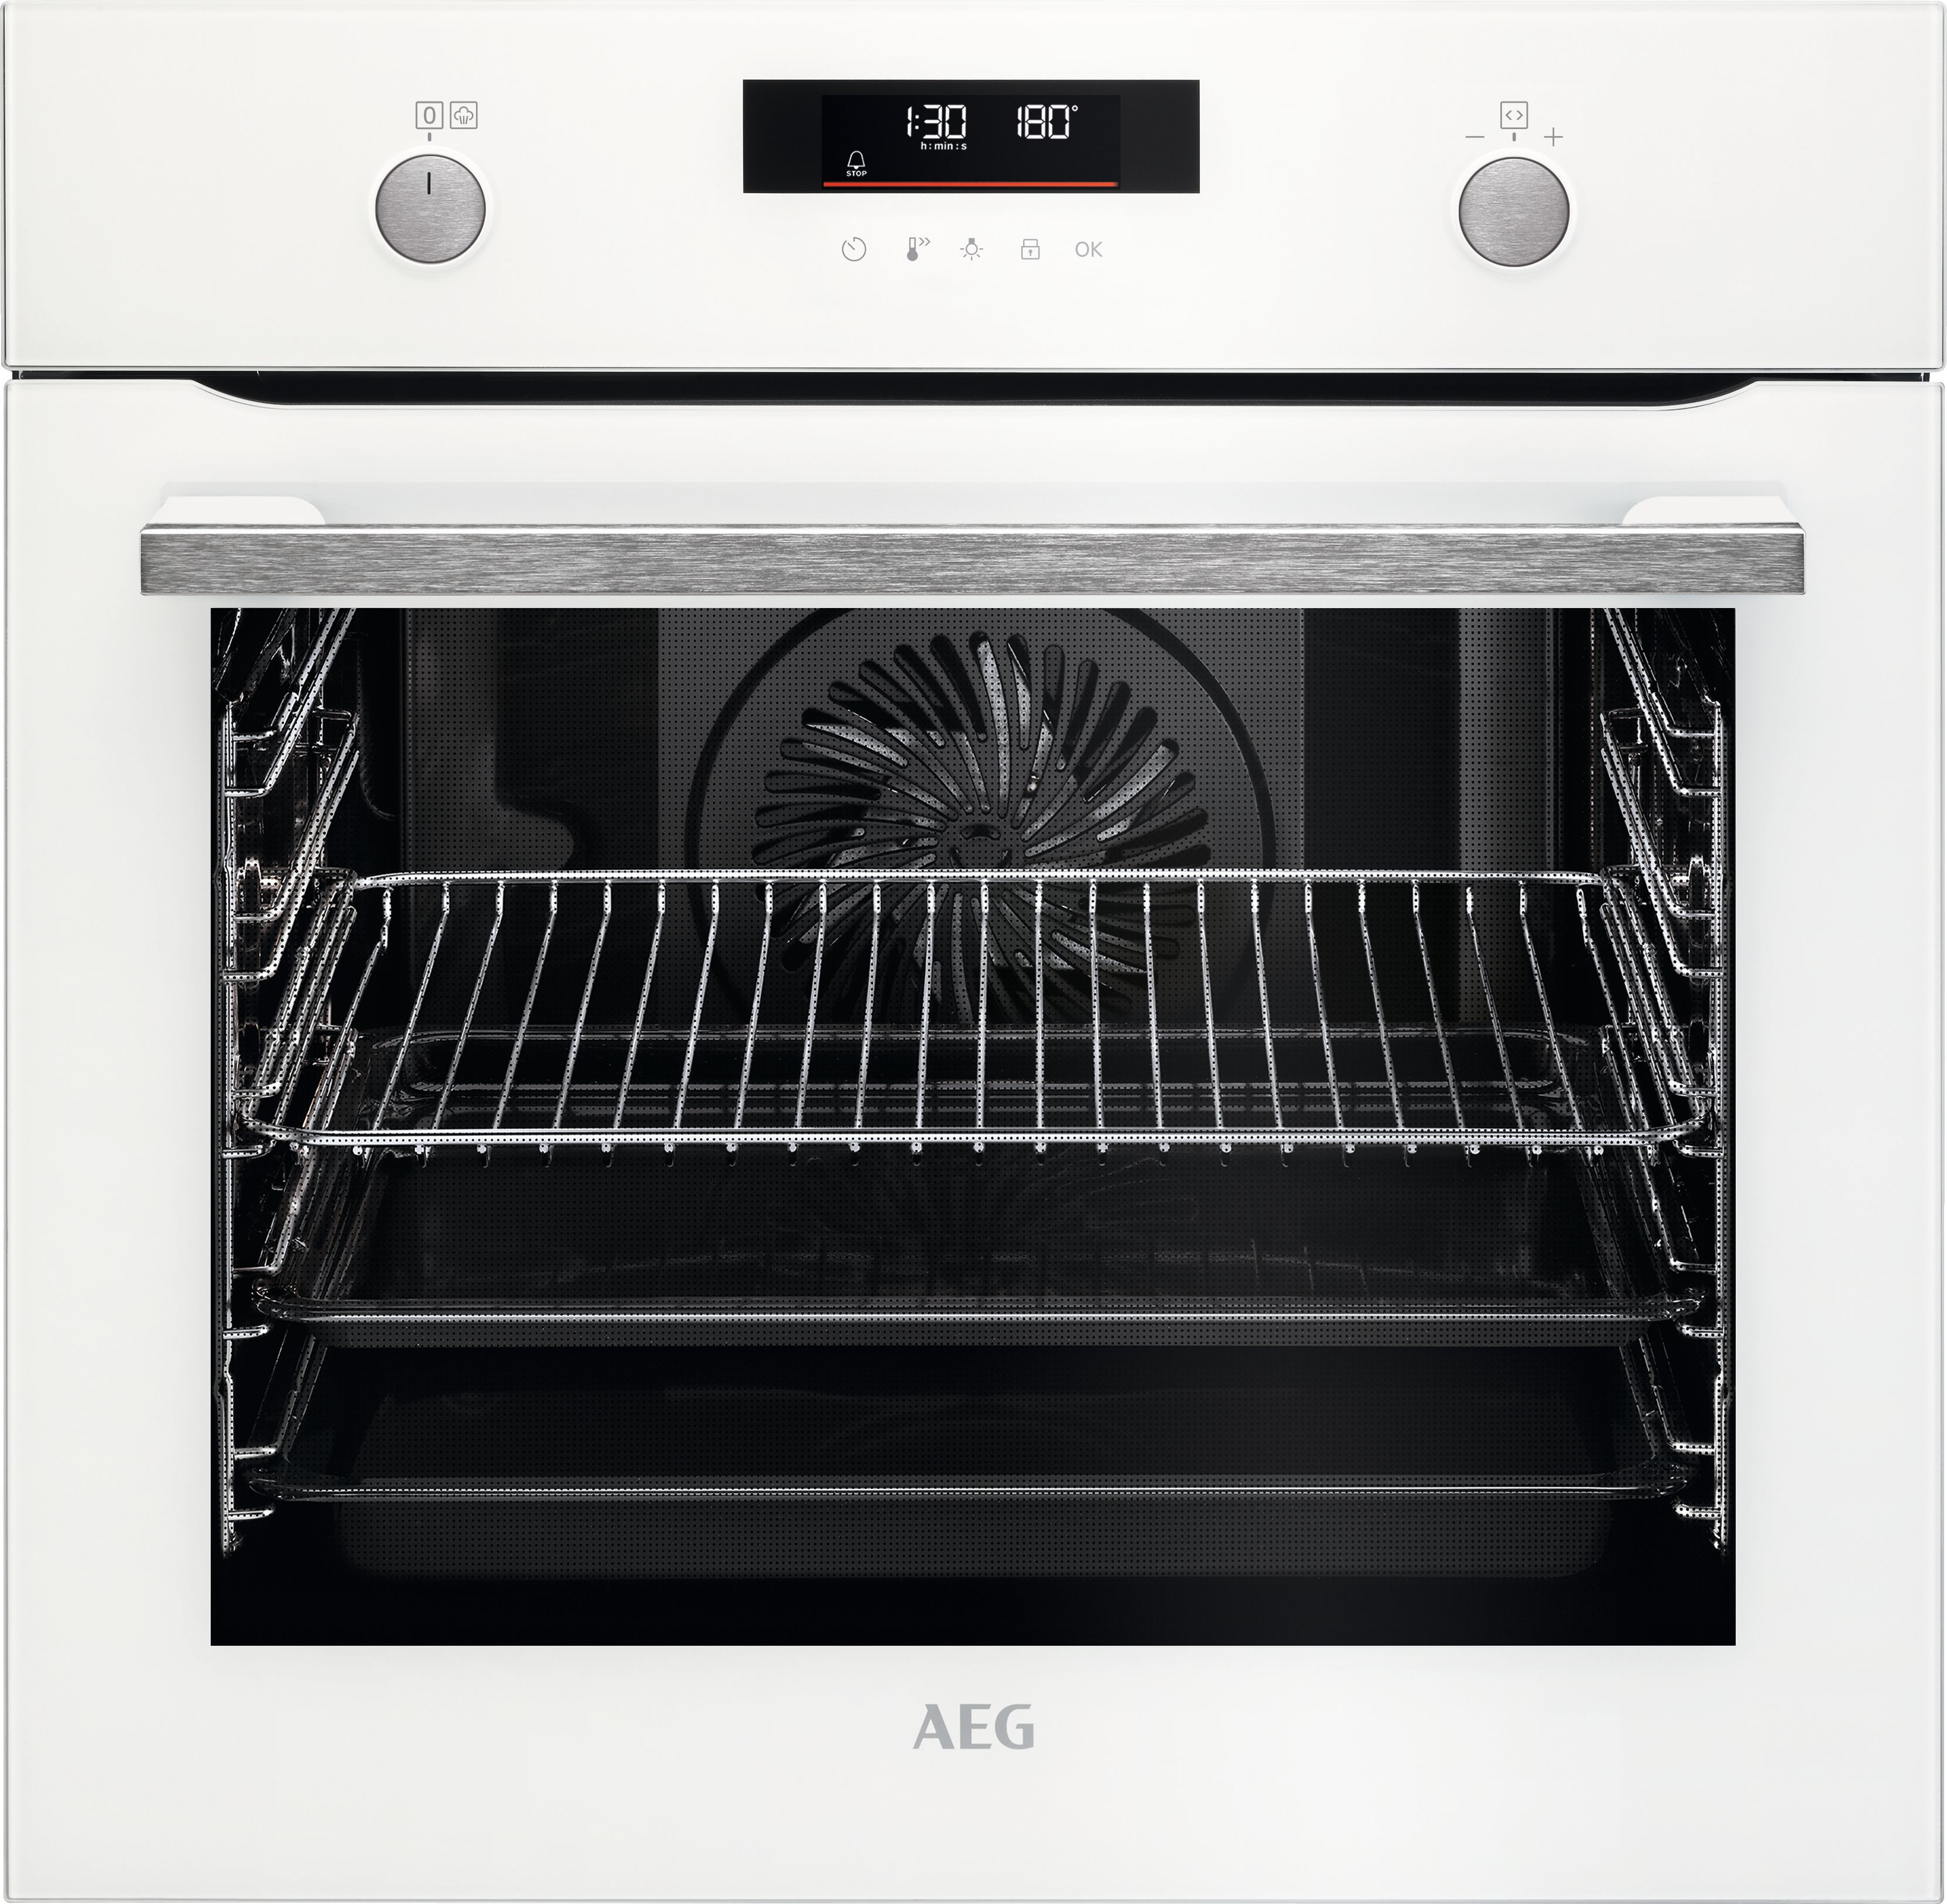 AEG Steambake BPS555060W Built In Electric Single Oven with Pyrolytic Cleaning - White - A+ Rated, White